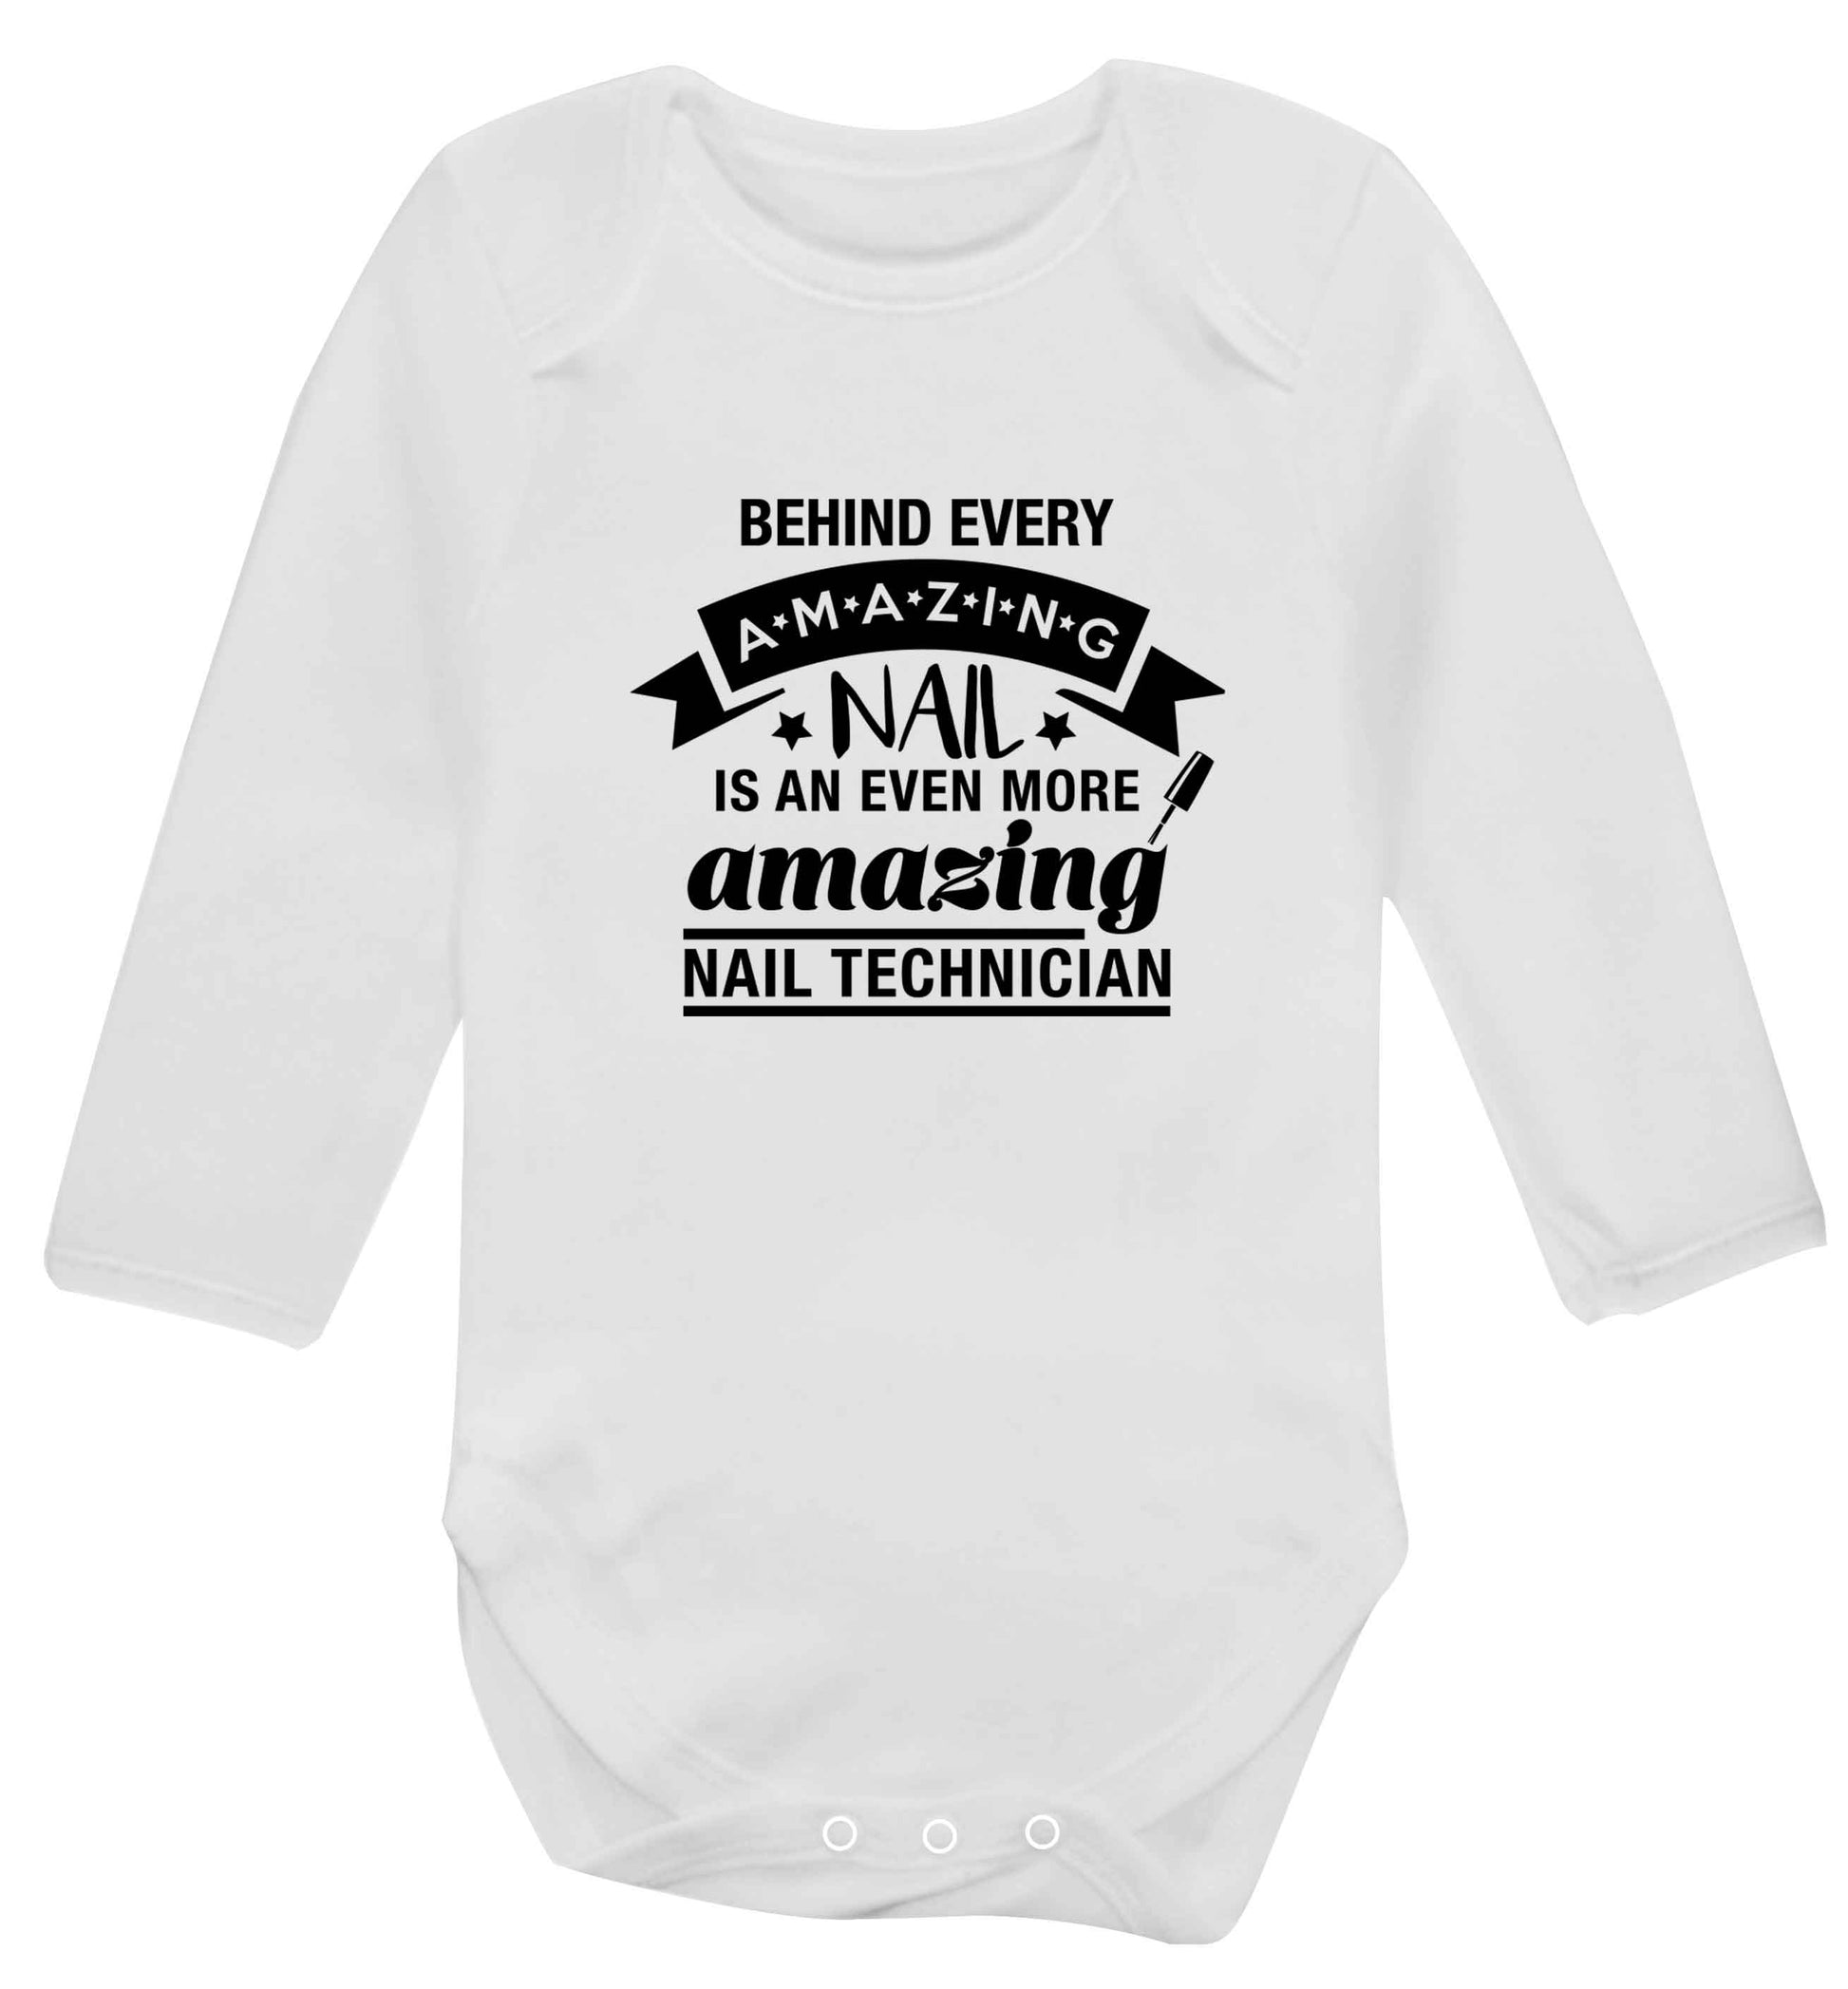 Behind every amazing nail is an even more amazing nail technician baby vest long sleeved white 6-12 months